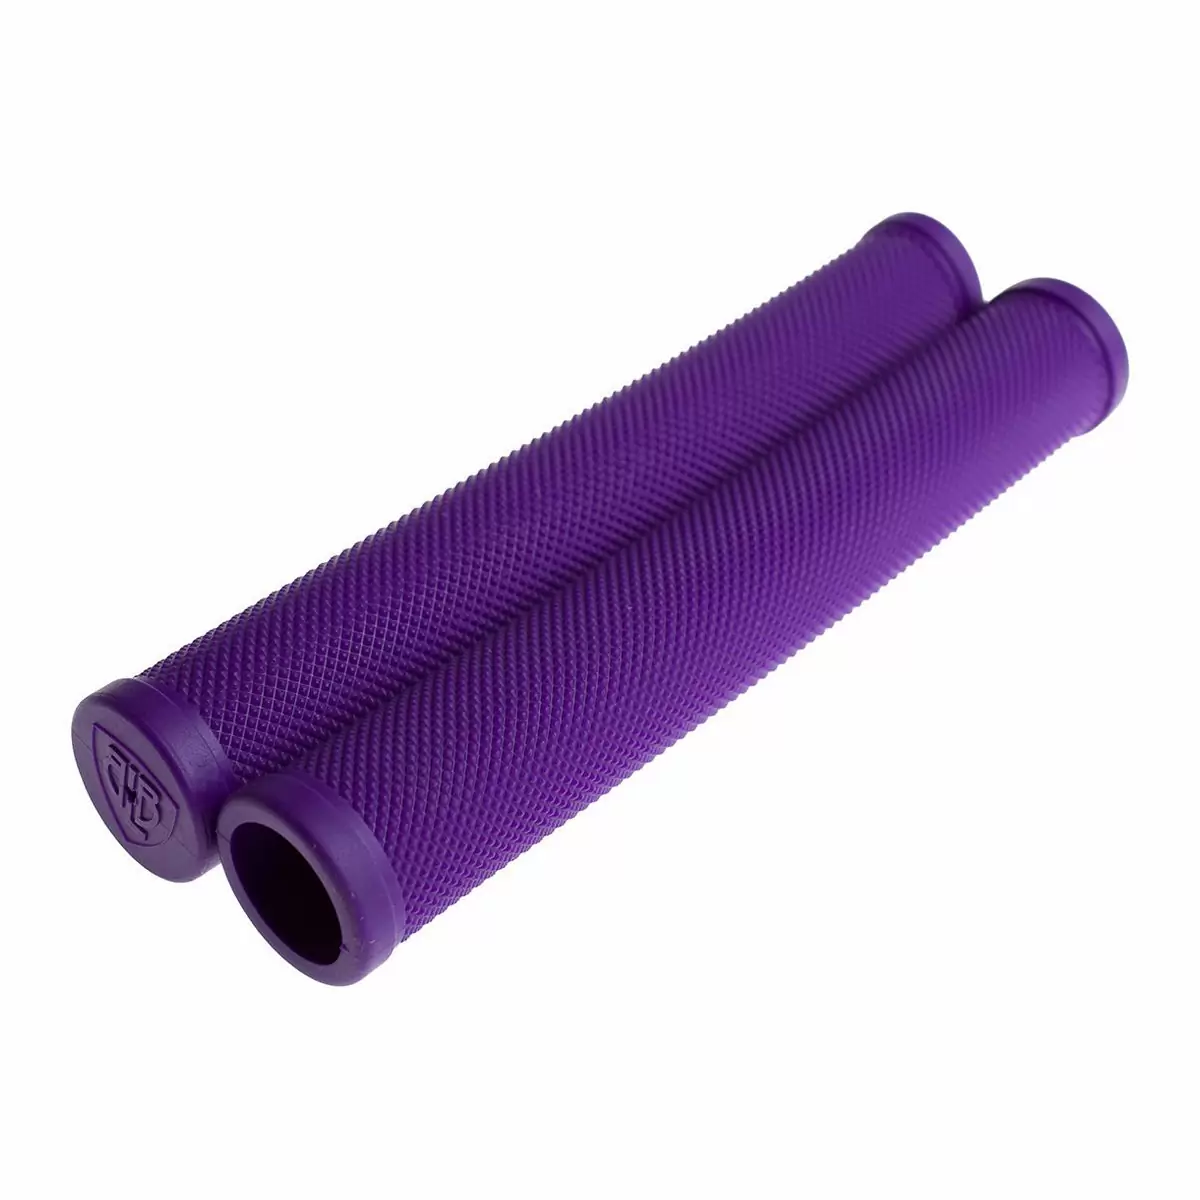 Pair chewy grips purple - image